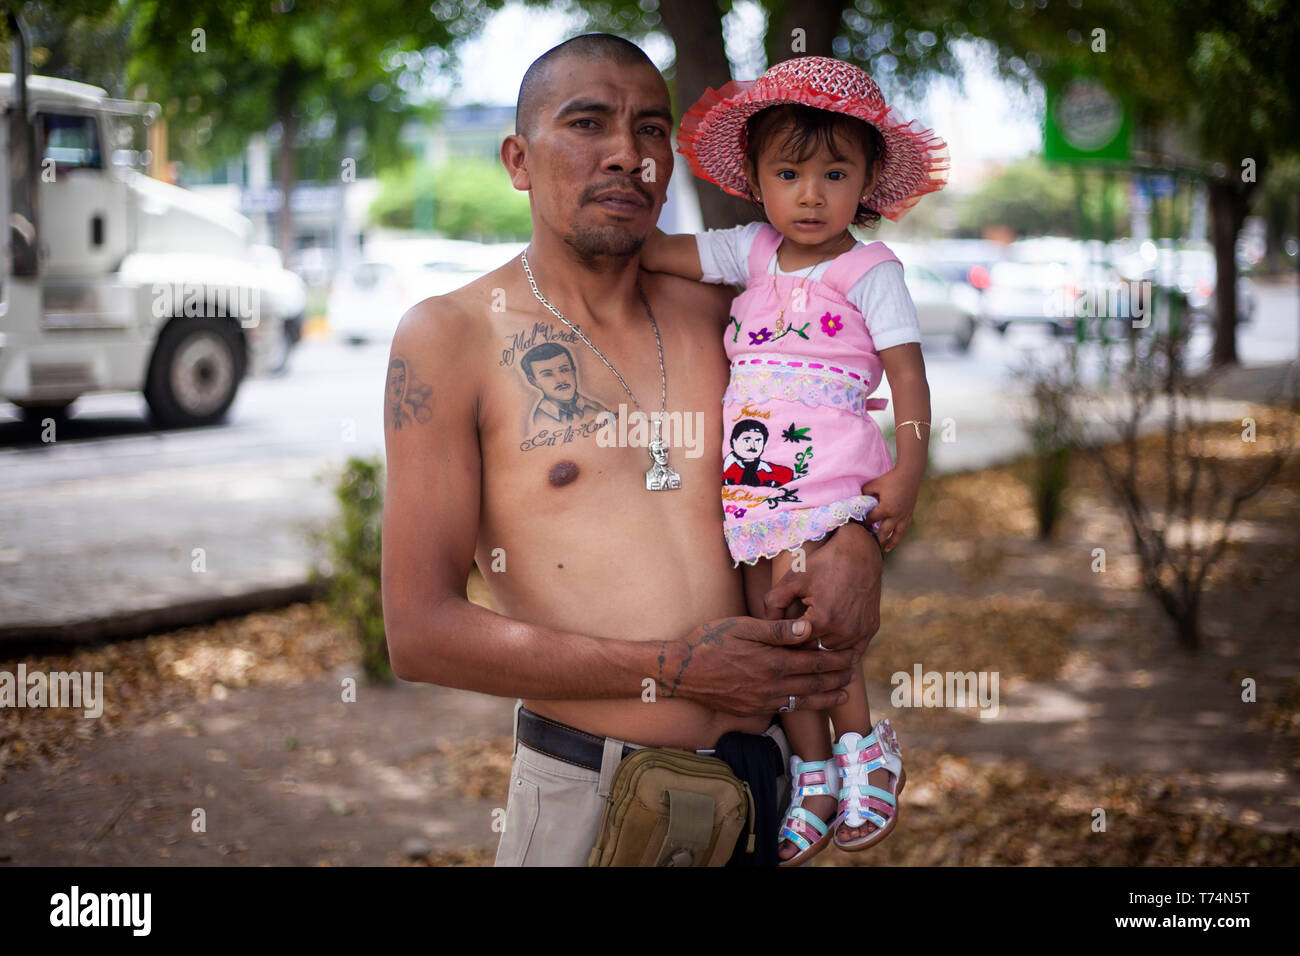 Culiacan, Mexico. 03rd May, 2019. Jose Luis holds his daughter Arely and has a tattoo of Jesus Malverde, who is considered a saint of drug bosses in Mexico. On the occasion of his 110th anniversary of death on 03.05.2019 numerous faithful gathered in his native town in the federal state of Sinaloa. Malverde, who is not recognized as a saint by the Catholic Church, is said to have been a highwayman during his lifetime. Many Mexicans worship him as a kind of Robin Hood. According to oral tradition, he robbed the rich families in the Sinaloa region and then distributed the booty among the poor. C Stock Photo